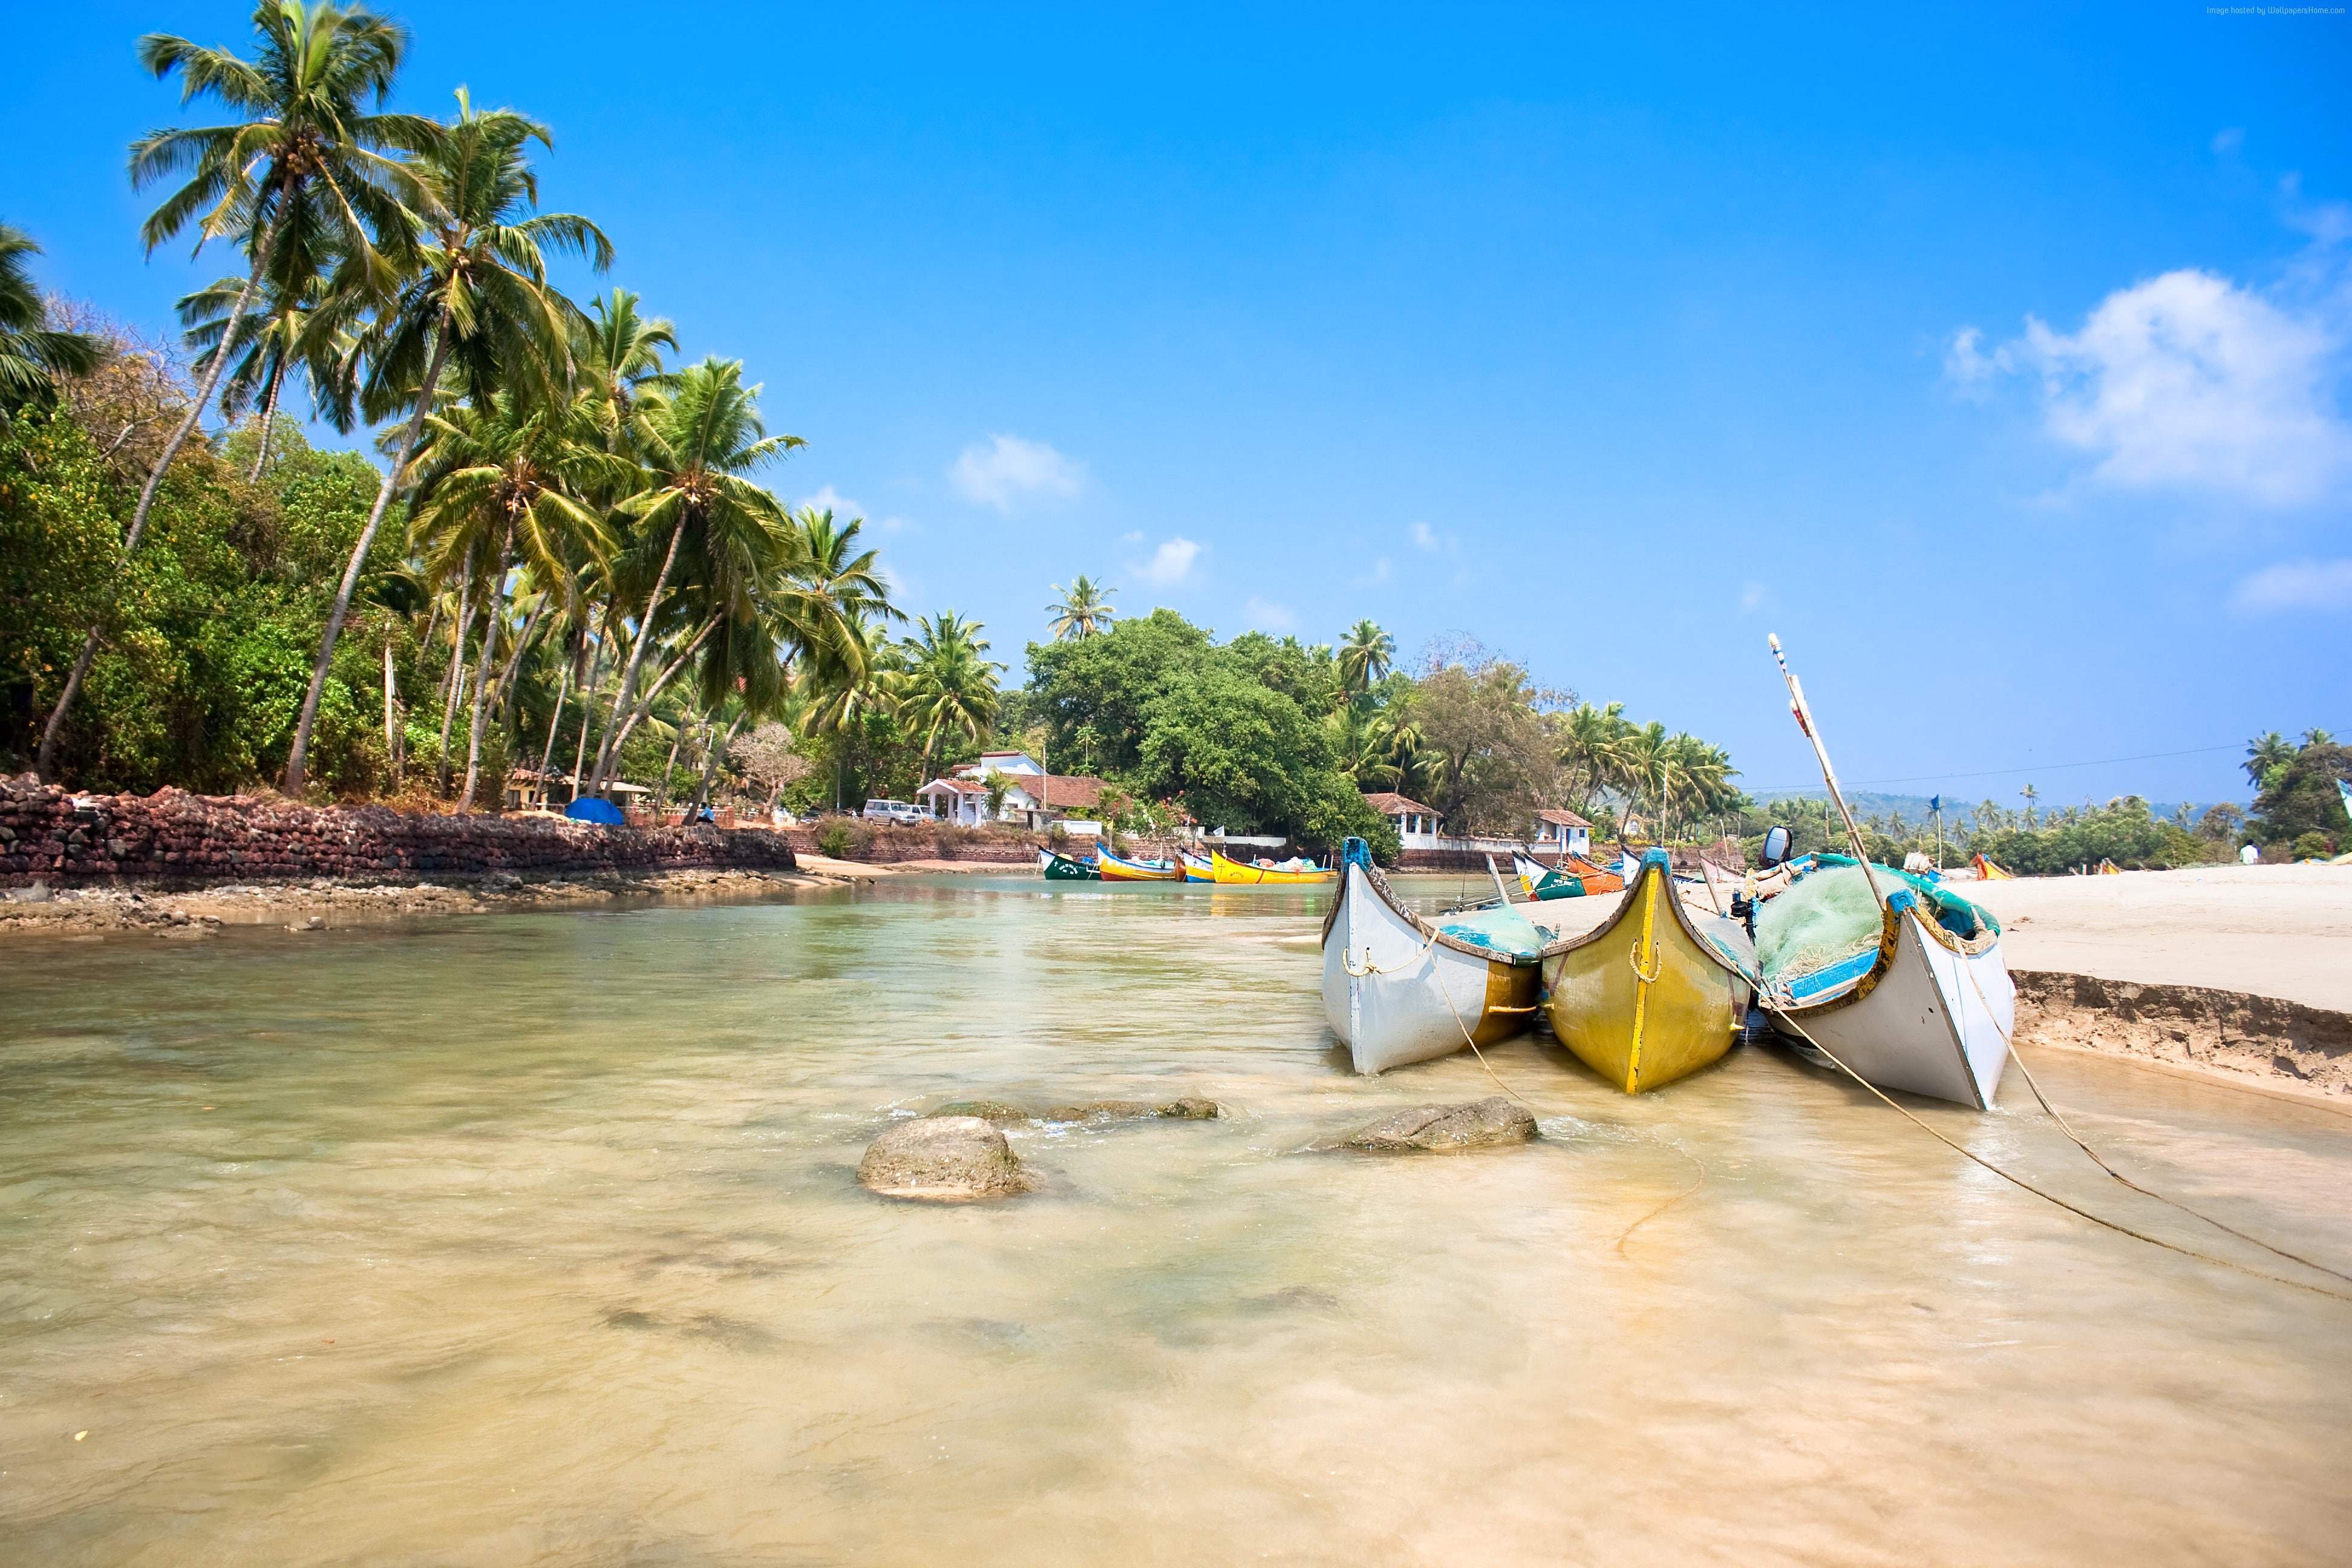 Goa, 4k, India, palms, boats, travel, Best Beaches in the World